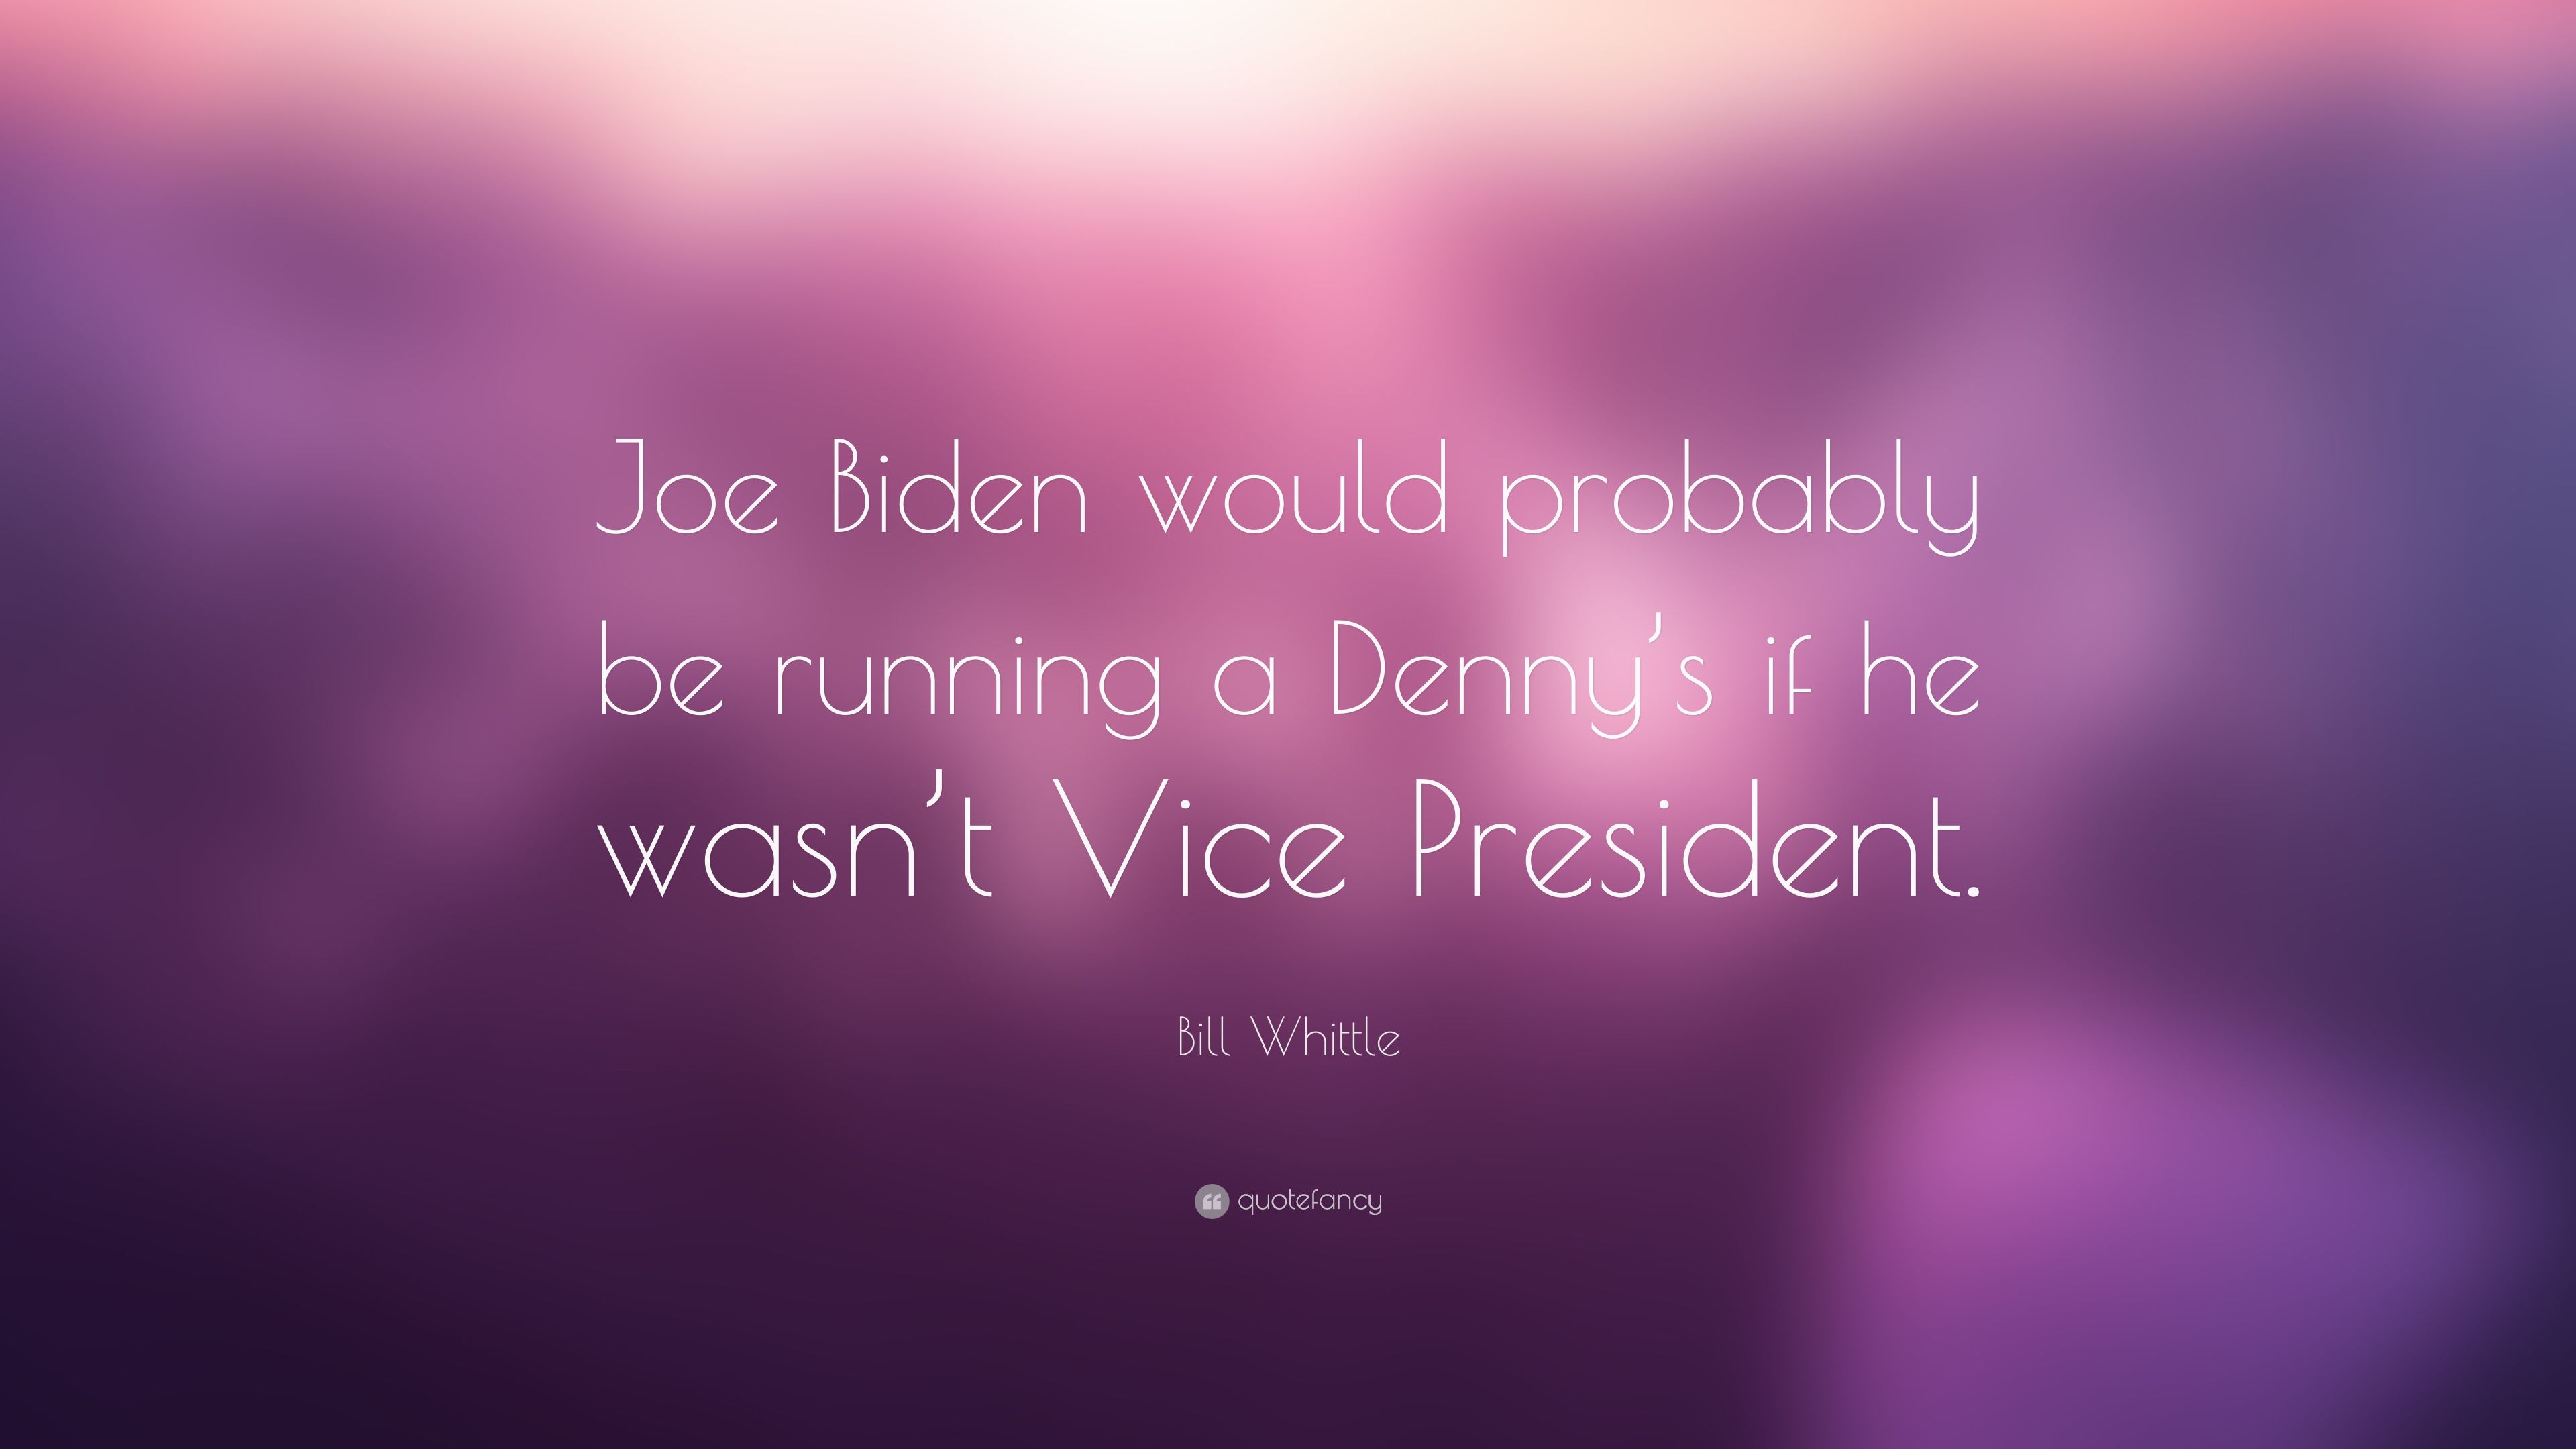 Bill Whittle Quote: “Joe Biden would probably be running a Denny's